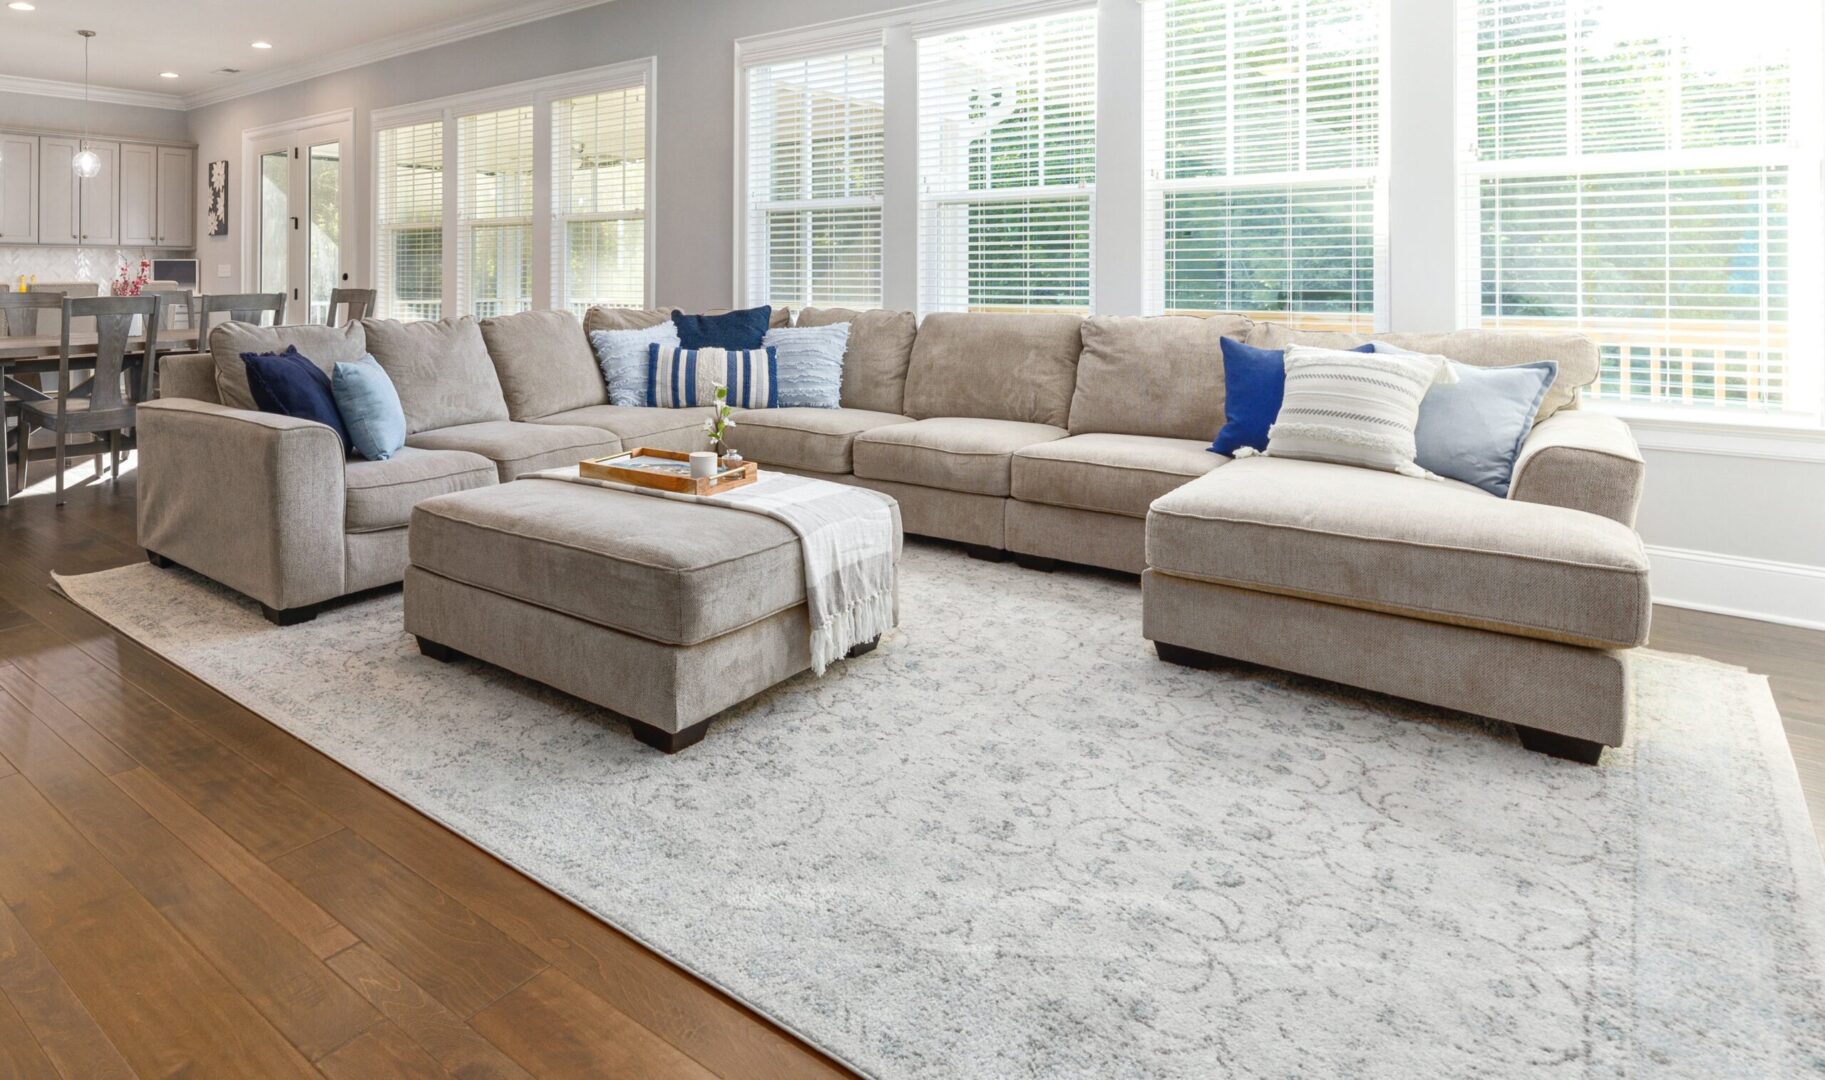 A large living room with couches and pillows on the floor